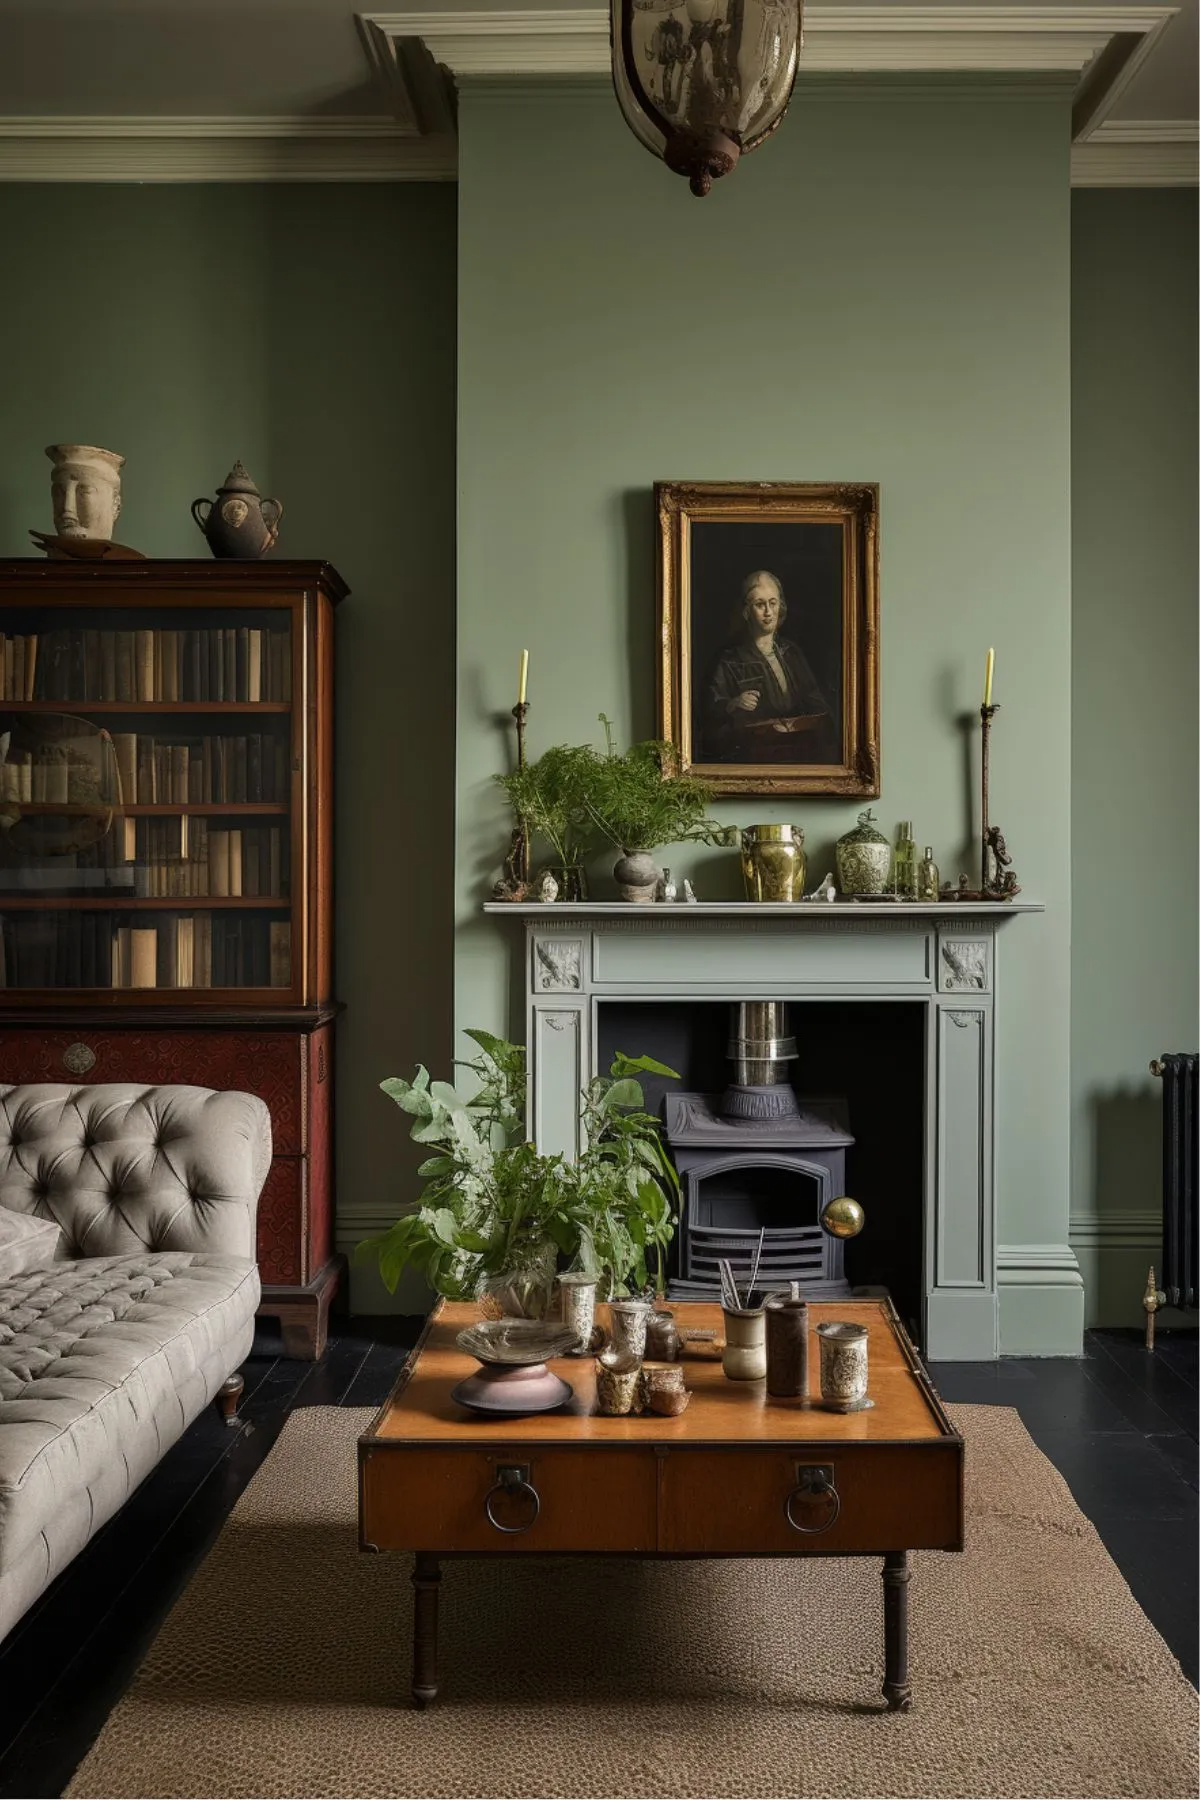 Effective aspects and strategies to make
your own green living room